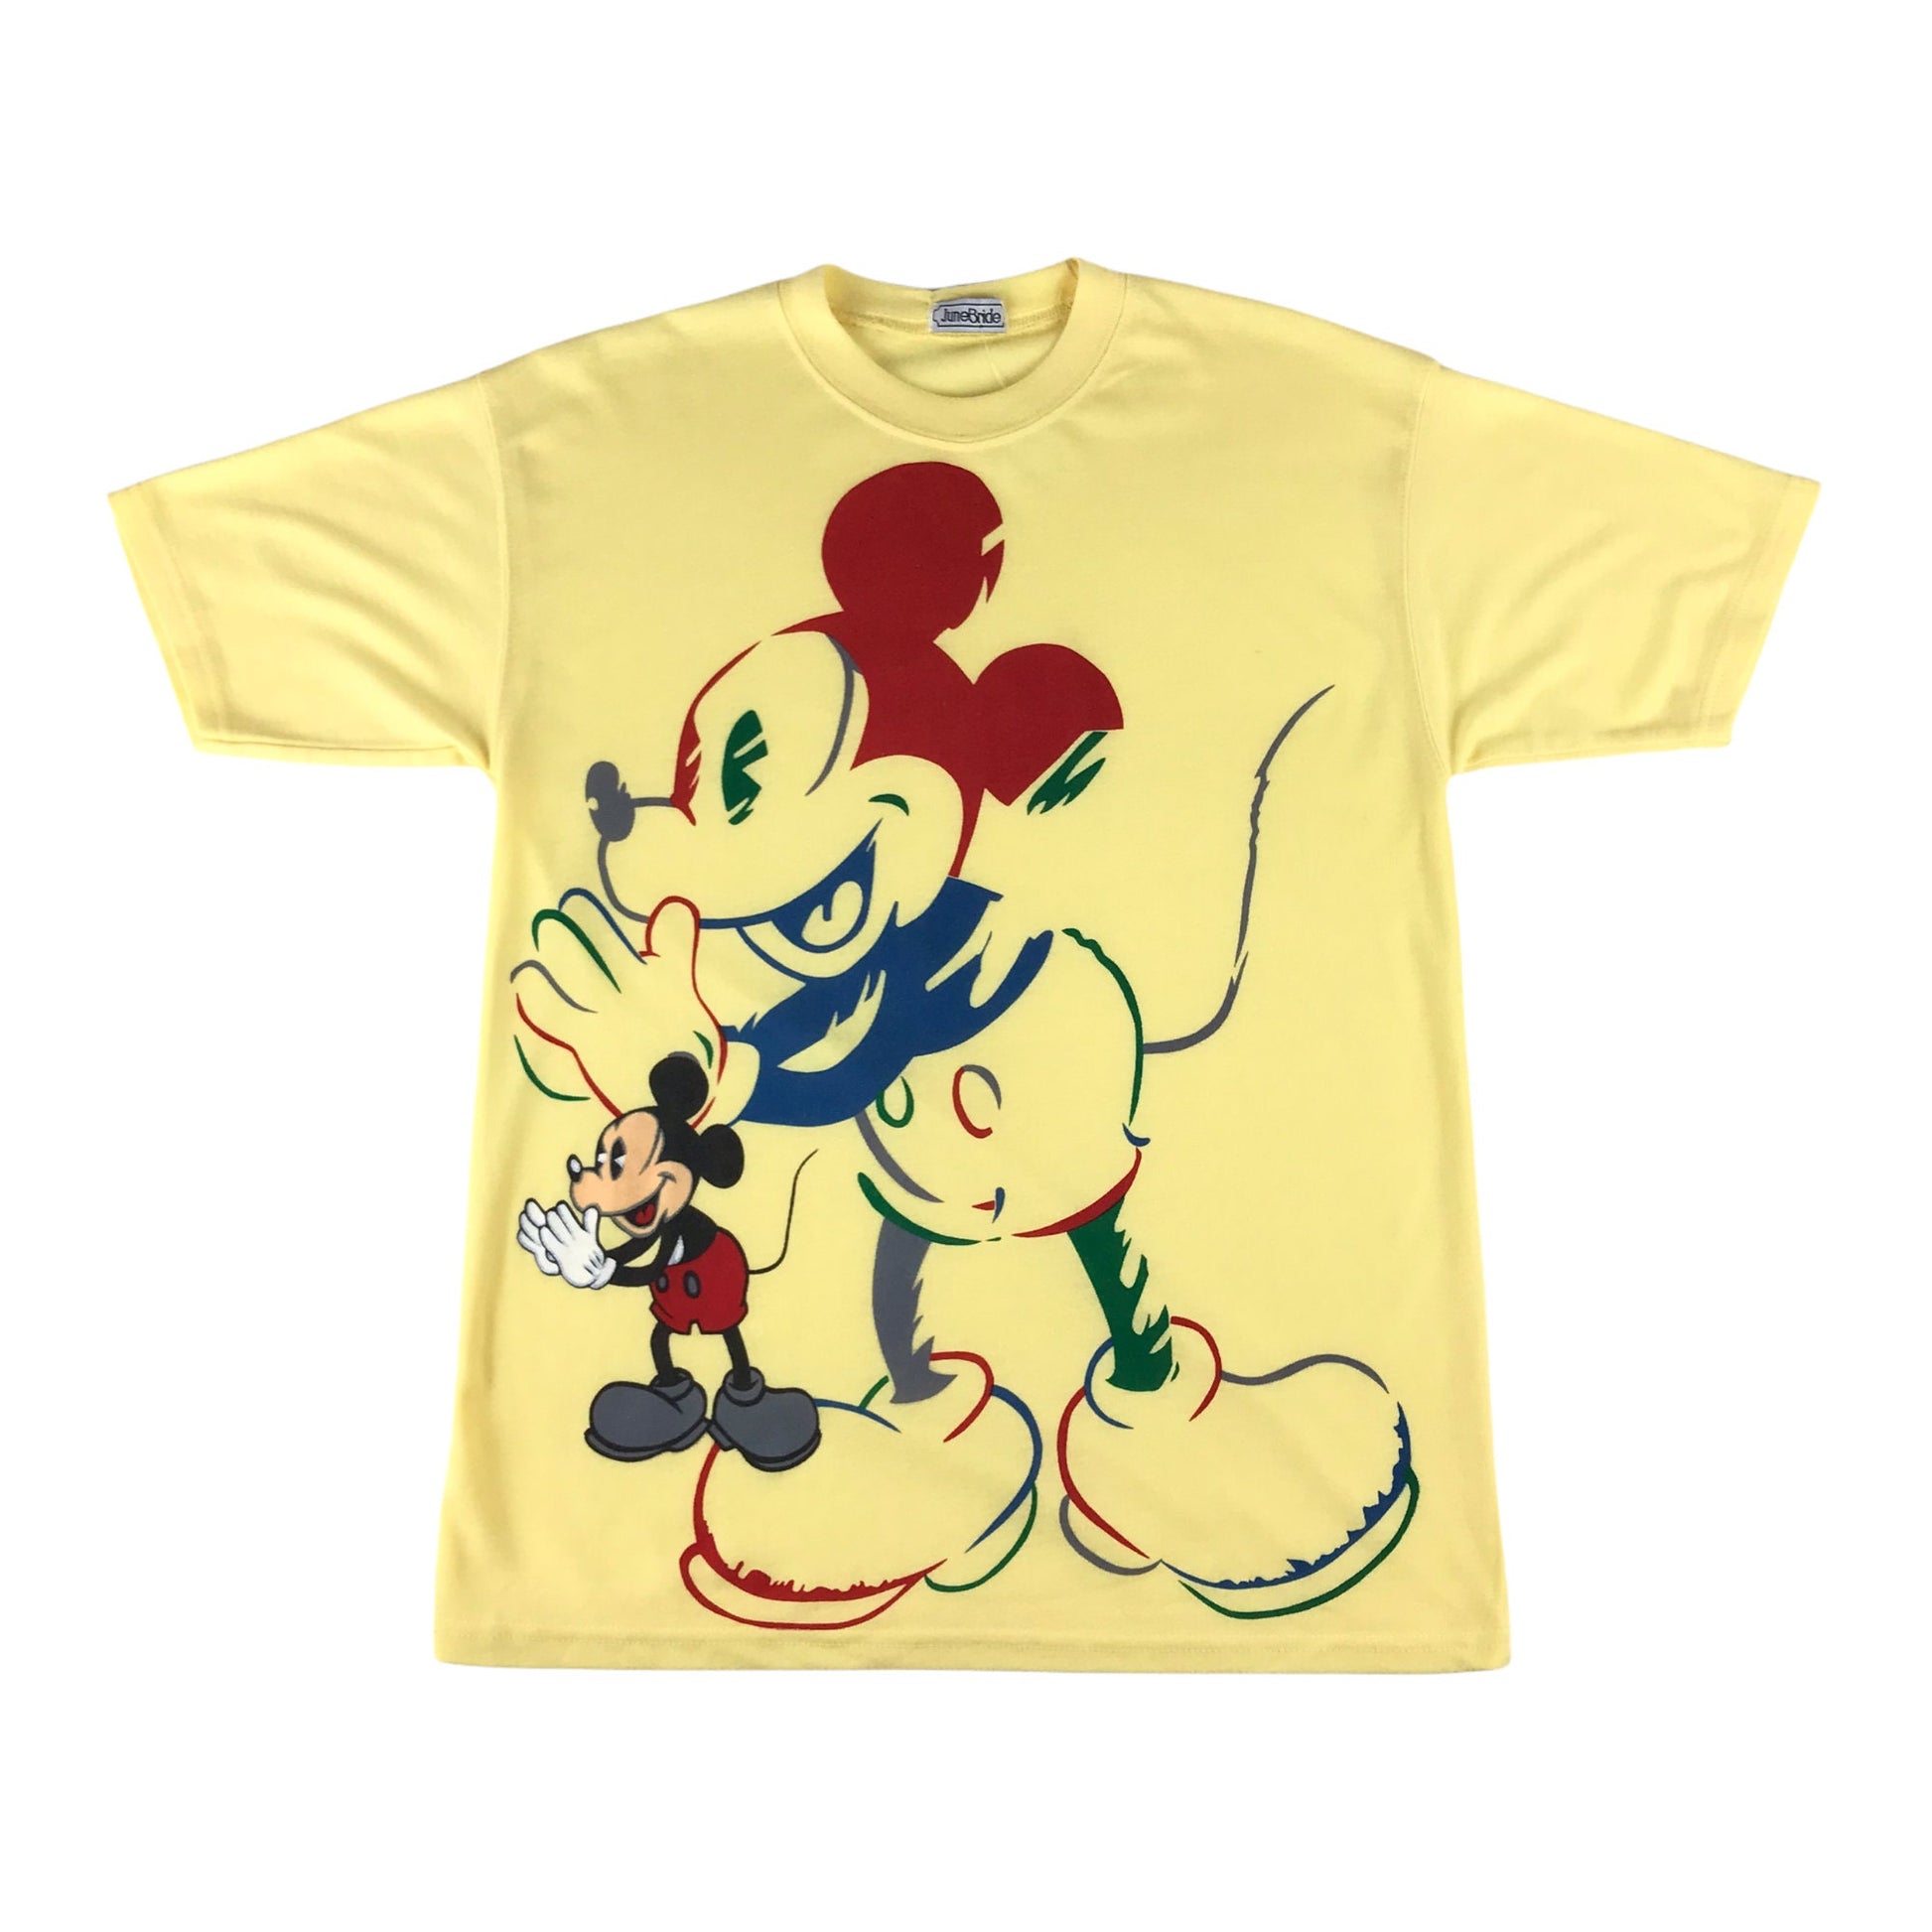 1990s/2000s Disney Mickey Mouse T-Shirt Size S/M